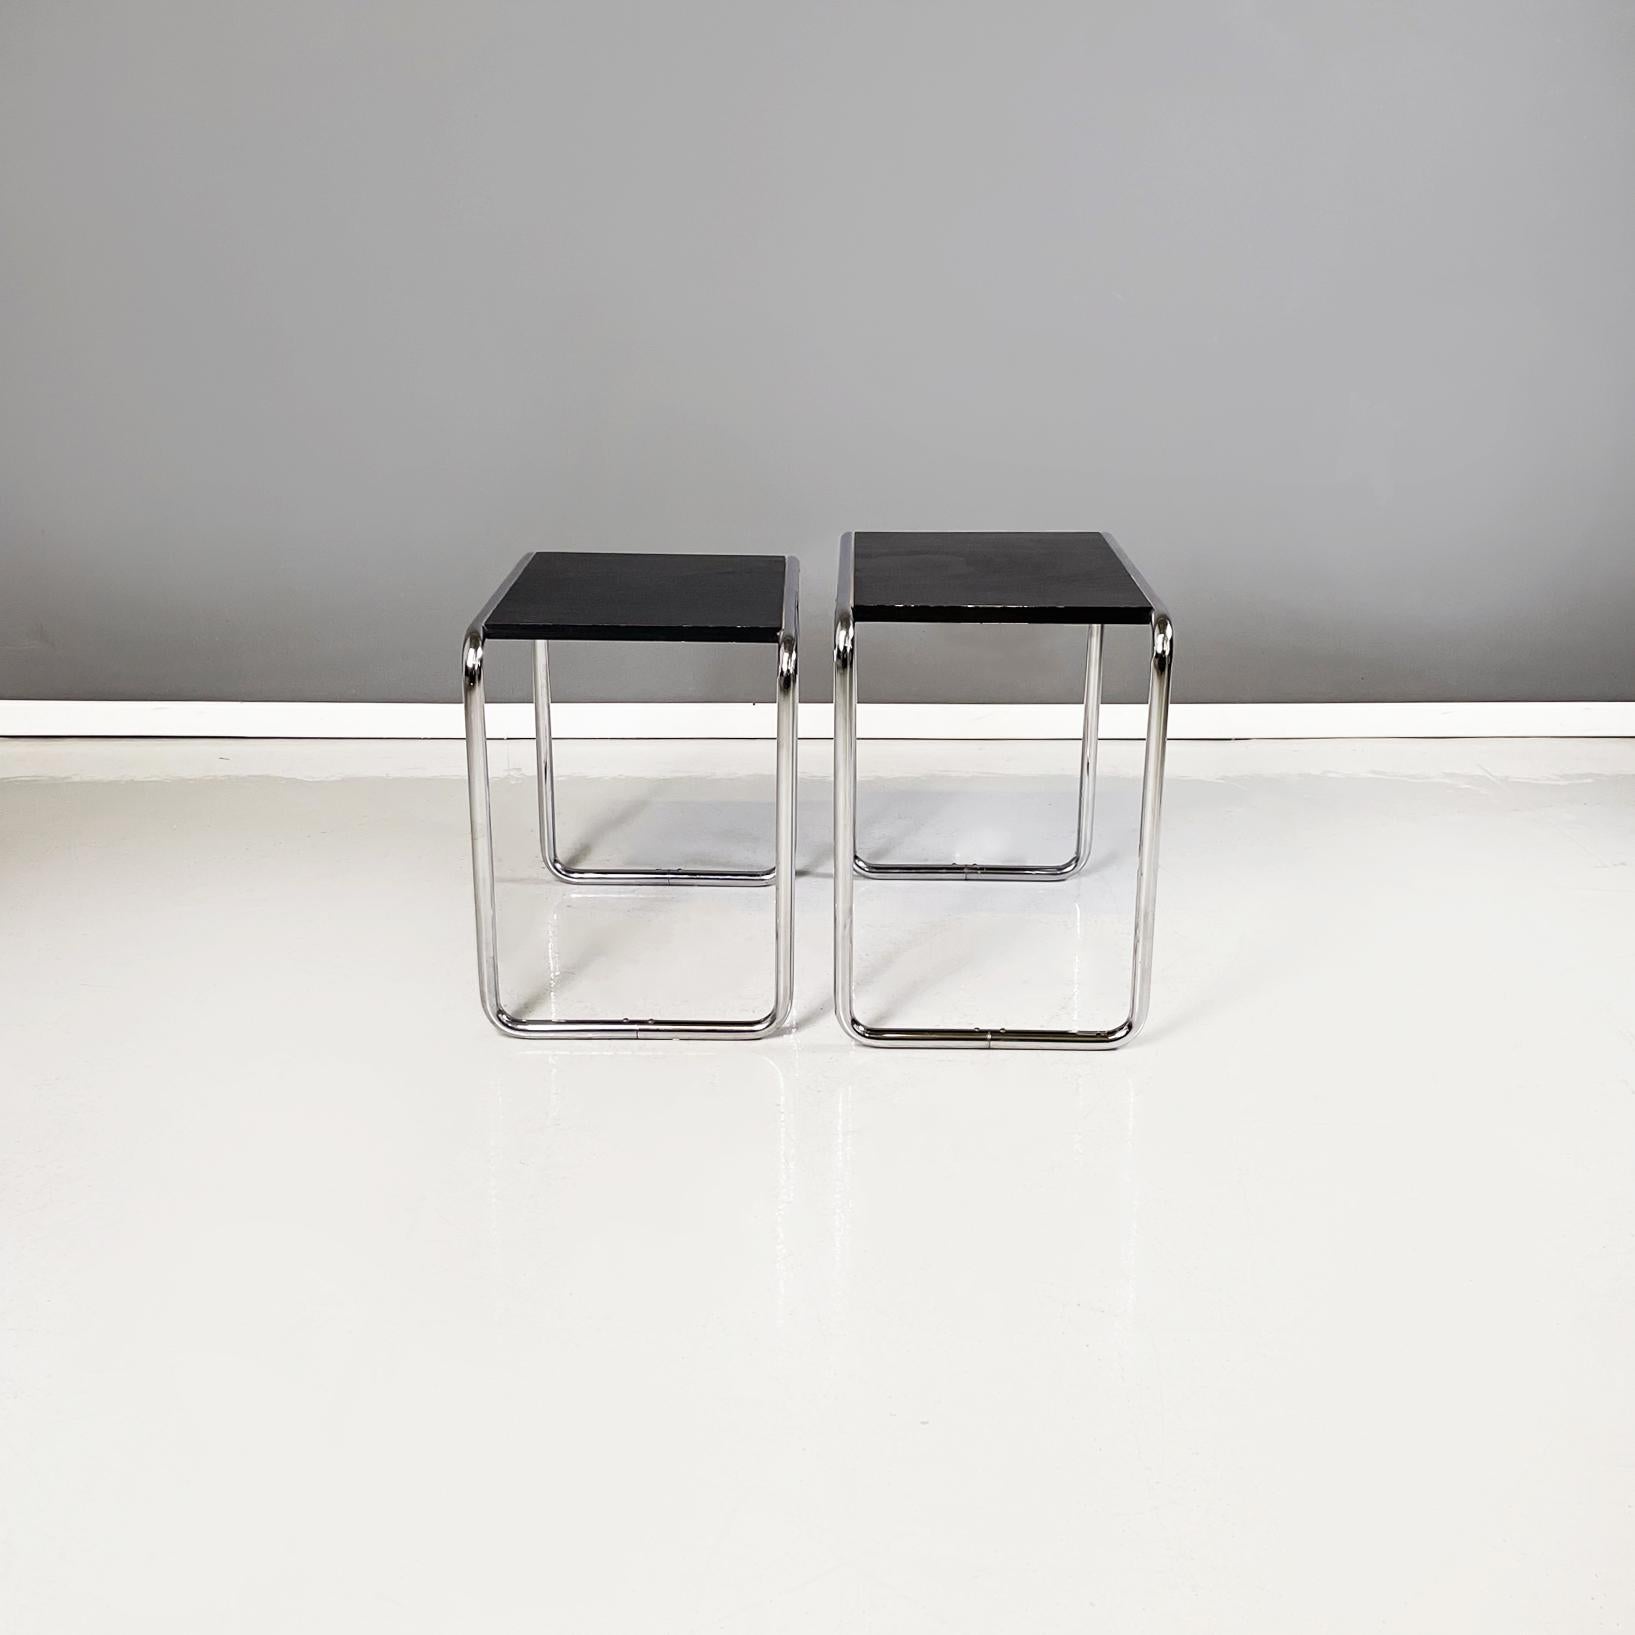 German modern Black wood and steel Coffee tables by Arnold Bauhaus Collection, 1980s
Pair of coffee tables that can be nested one inside the other. The rectangular top of the table is in black painted wood. The structure is in tubular